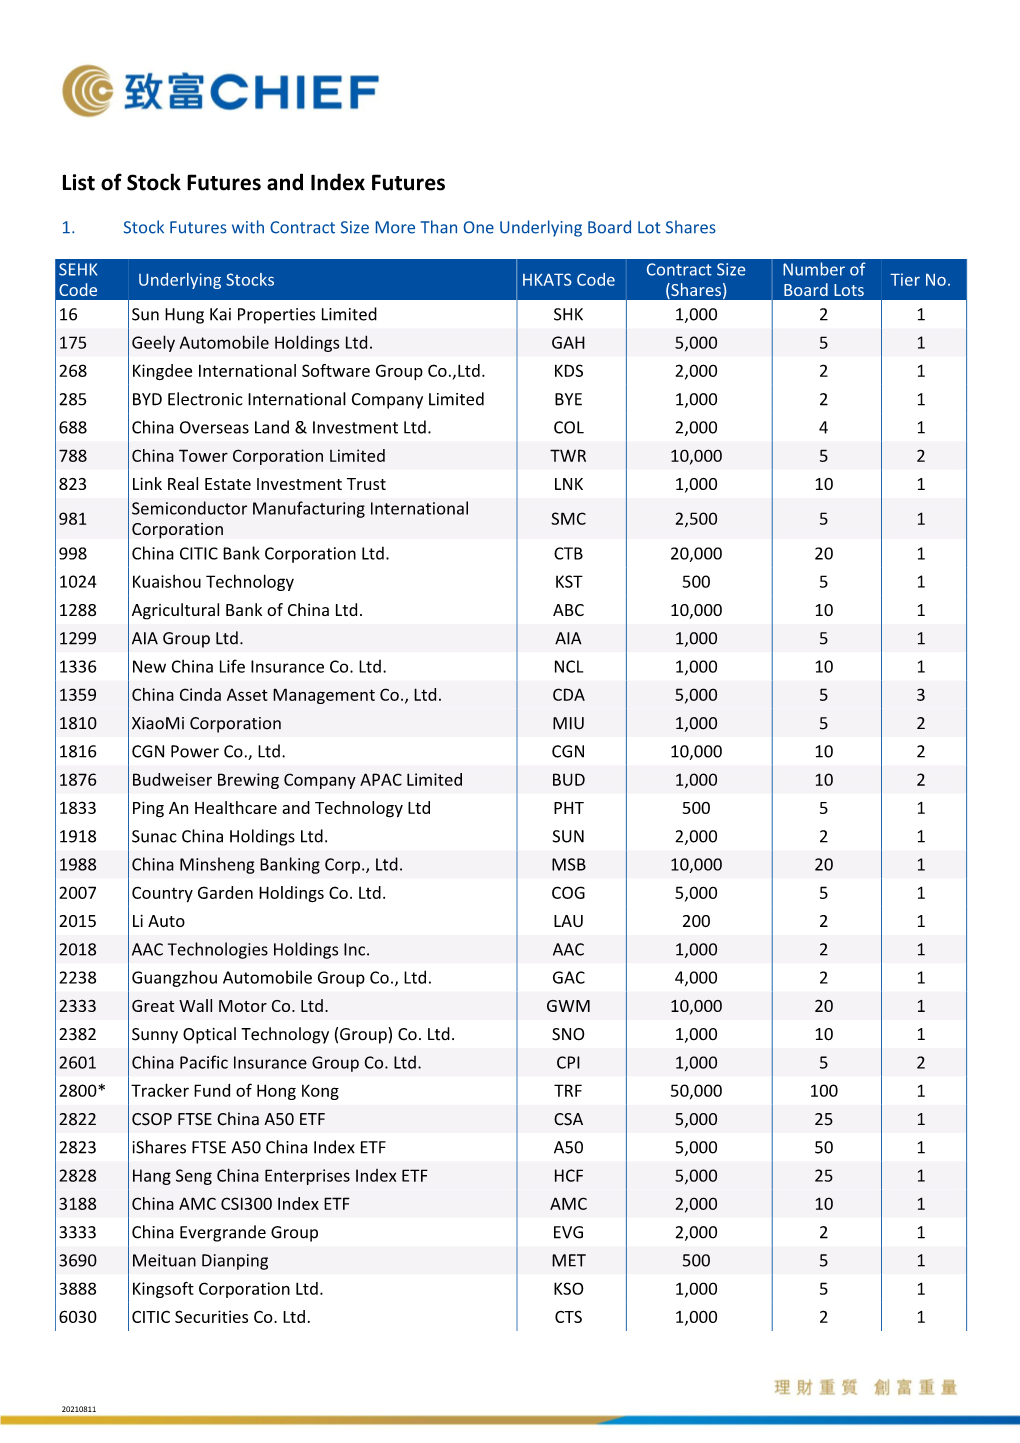 List of Stock Futures and Index Futures